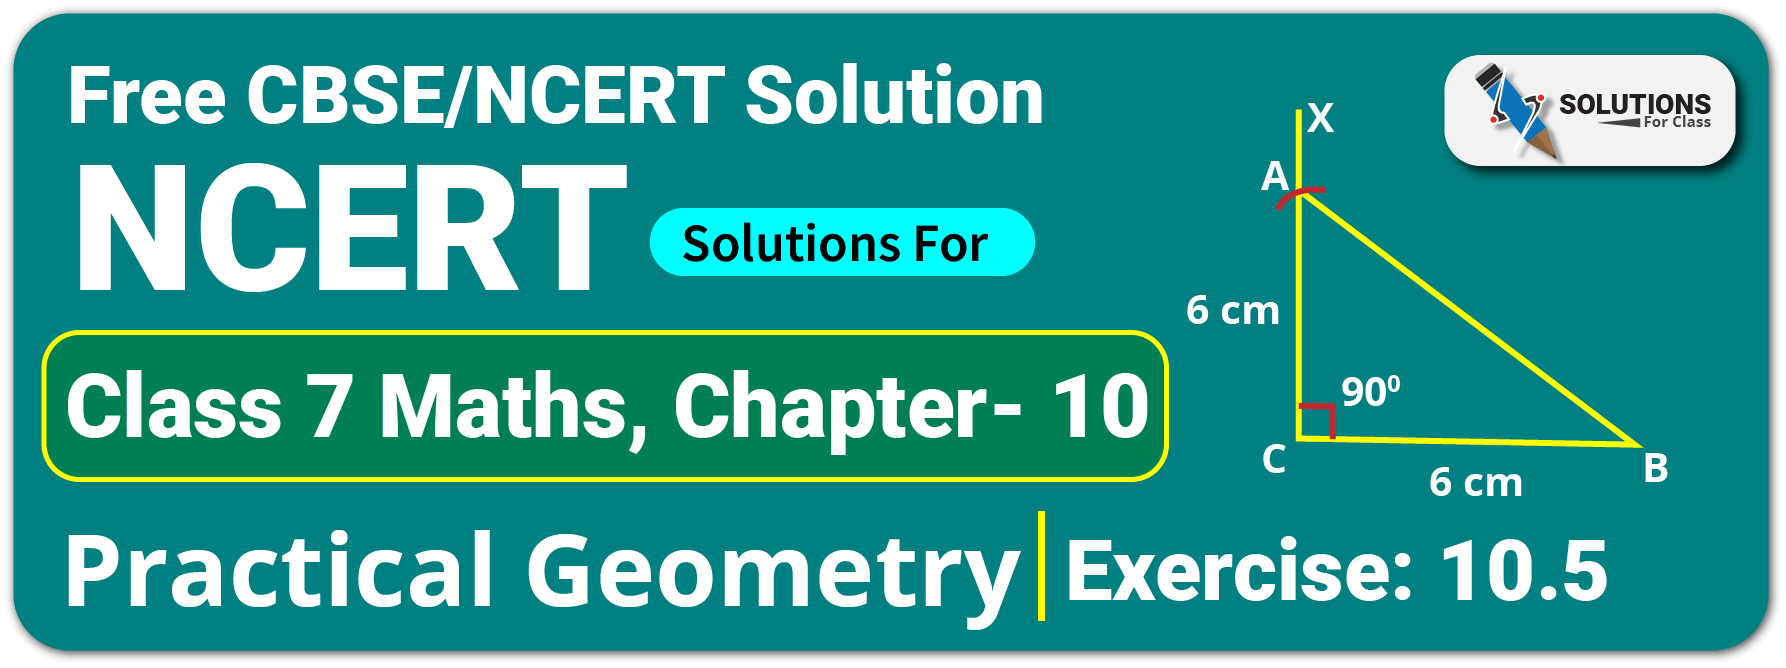 NCERT Solutions For Class 7 Maths Chapter 10 Practical Geometry Exercise 10.5